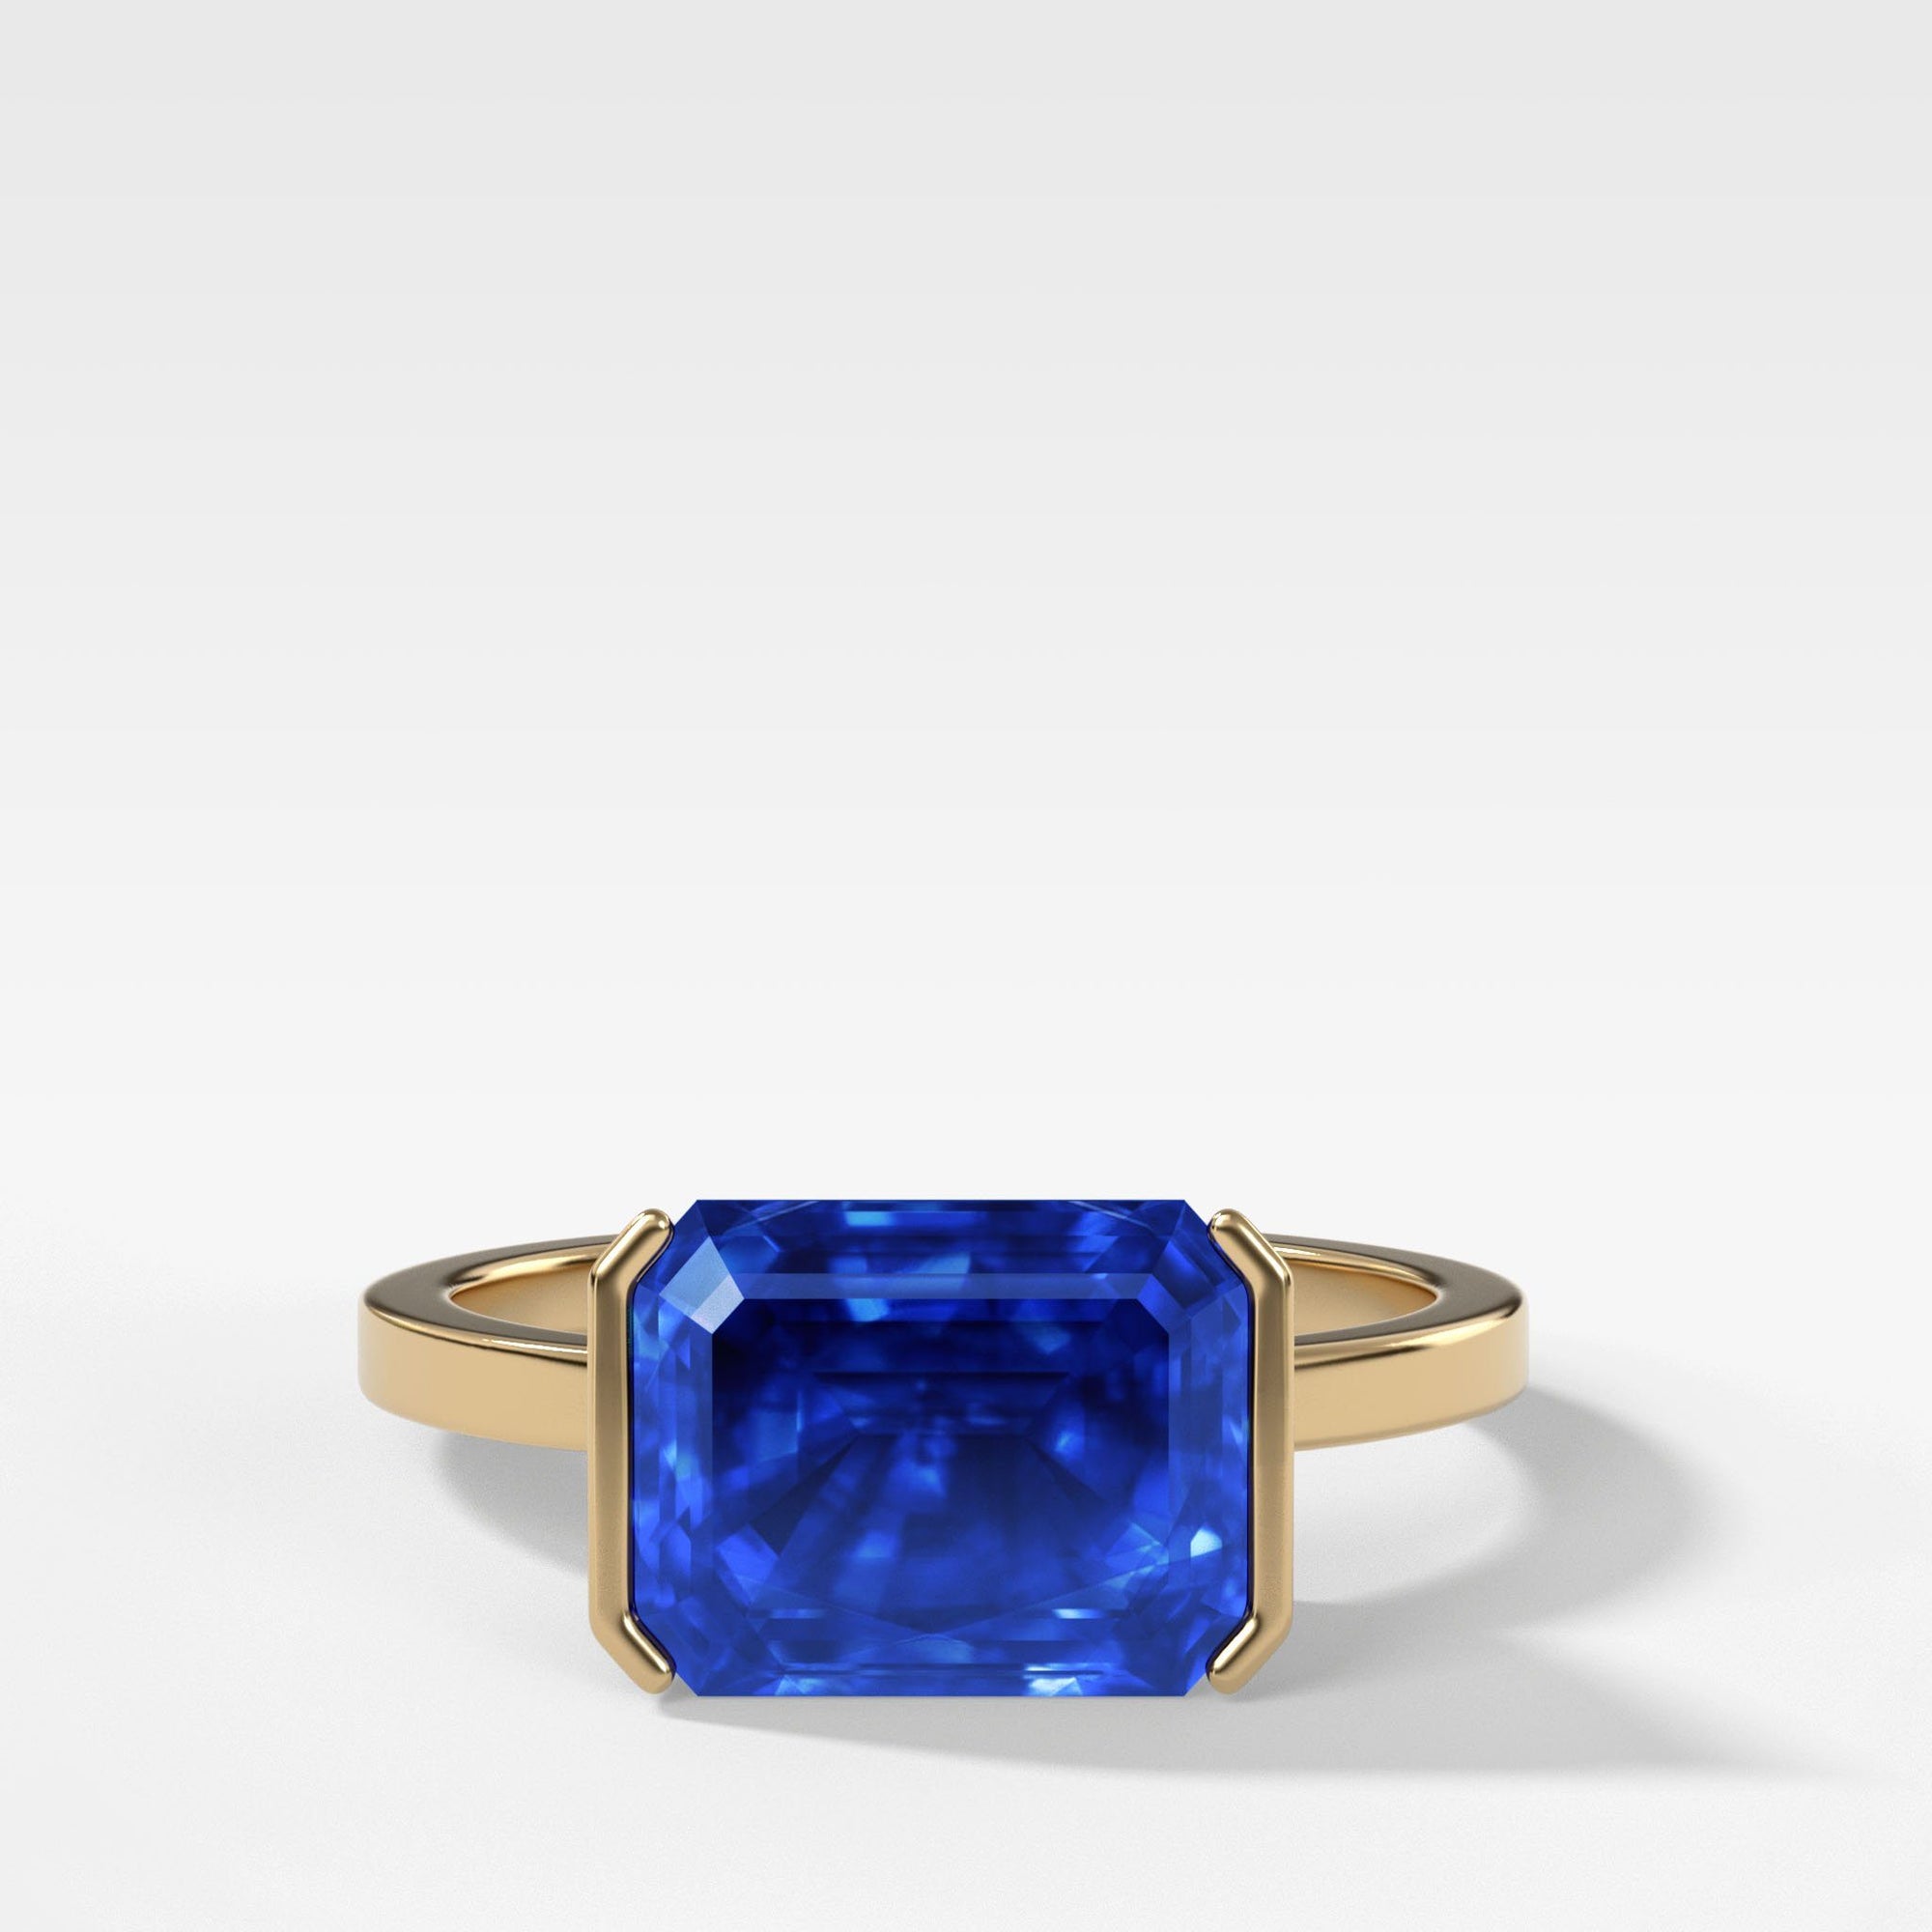 East West Half Bezel Solitaire with 2.99ct Emerald Ceylon Blue Sapphire by Good Stone in Yellow Gold